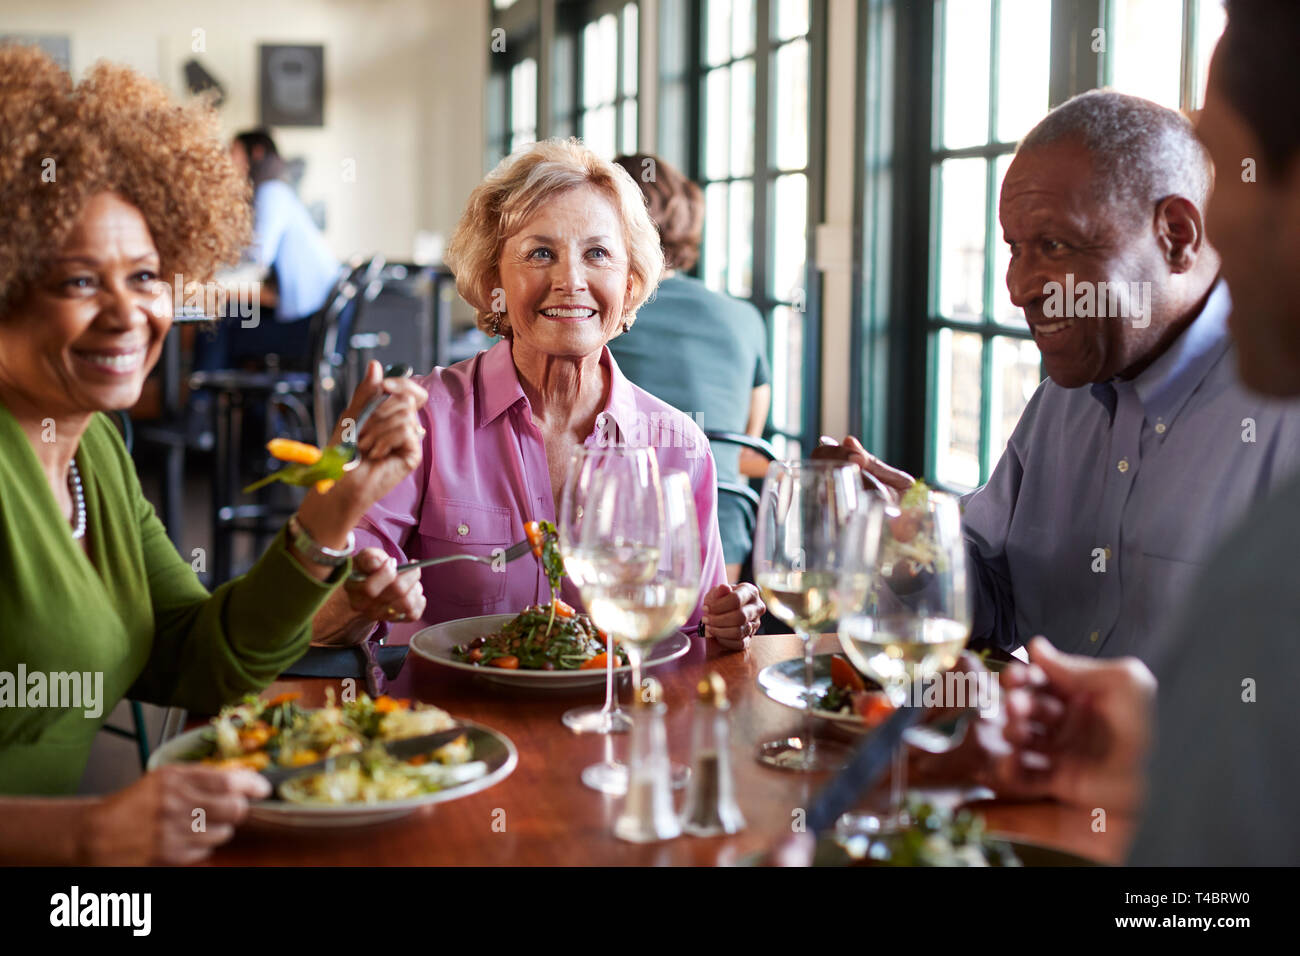 Group Of Smiling Senior Friends Meeting For Meal In Restaurant Stock Photo